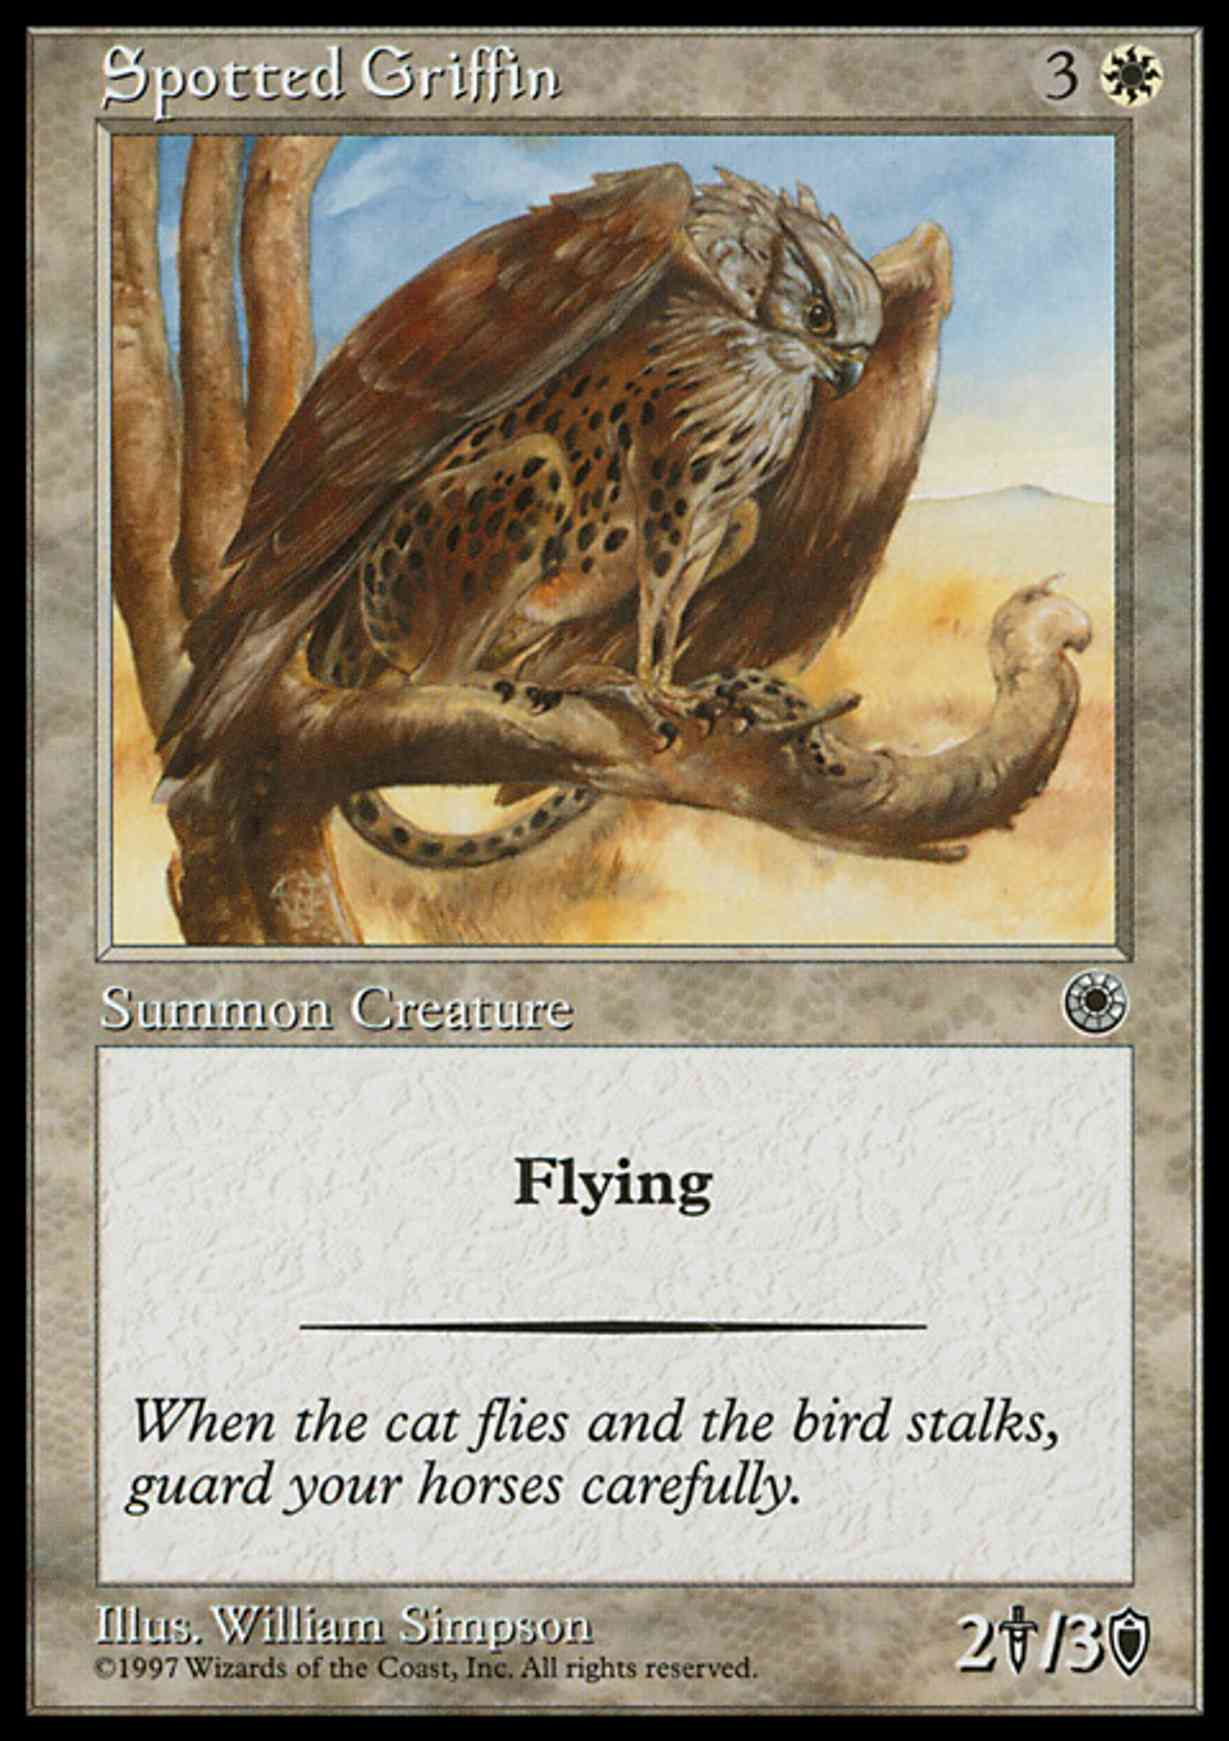 Spotted Griffin magic card front